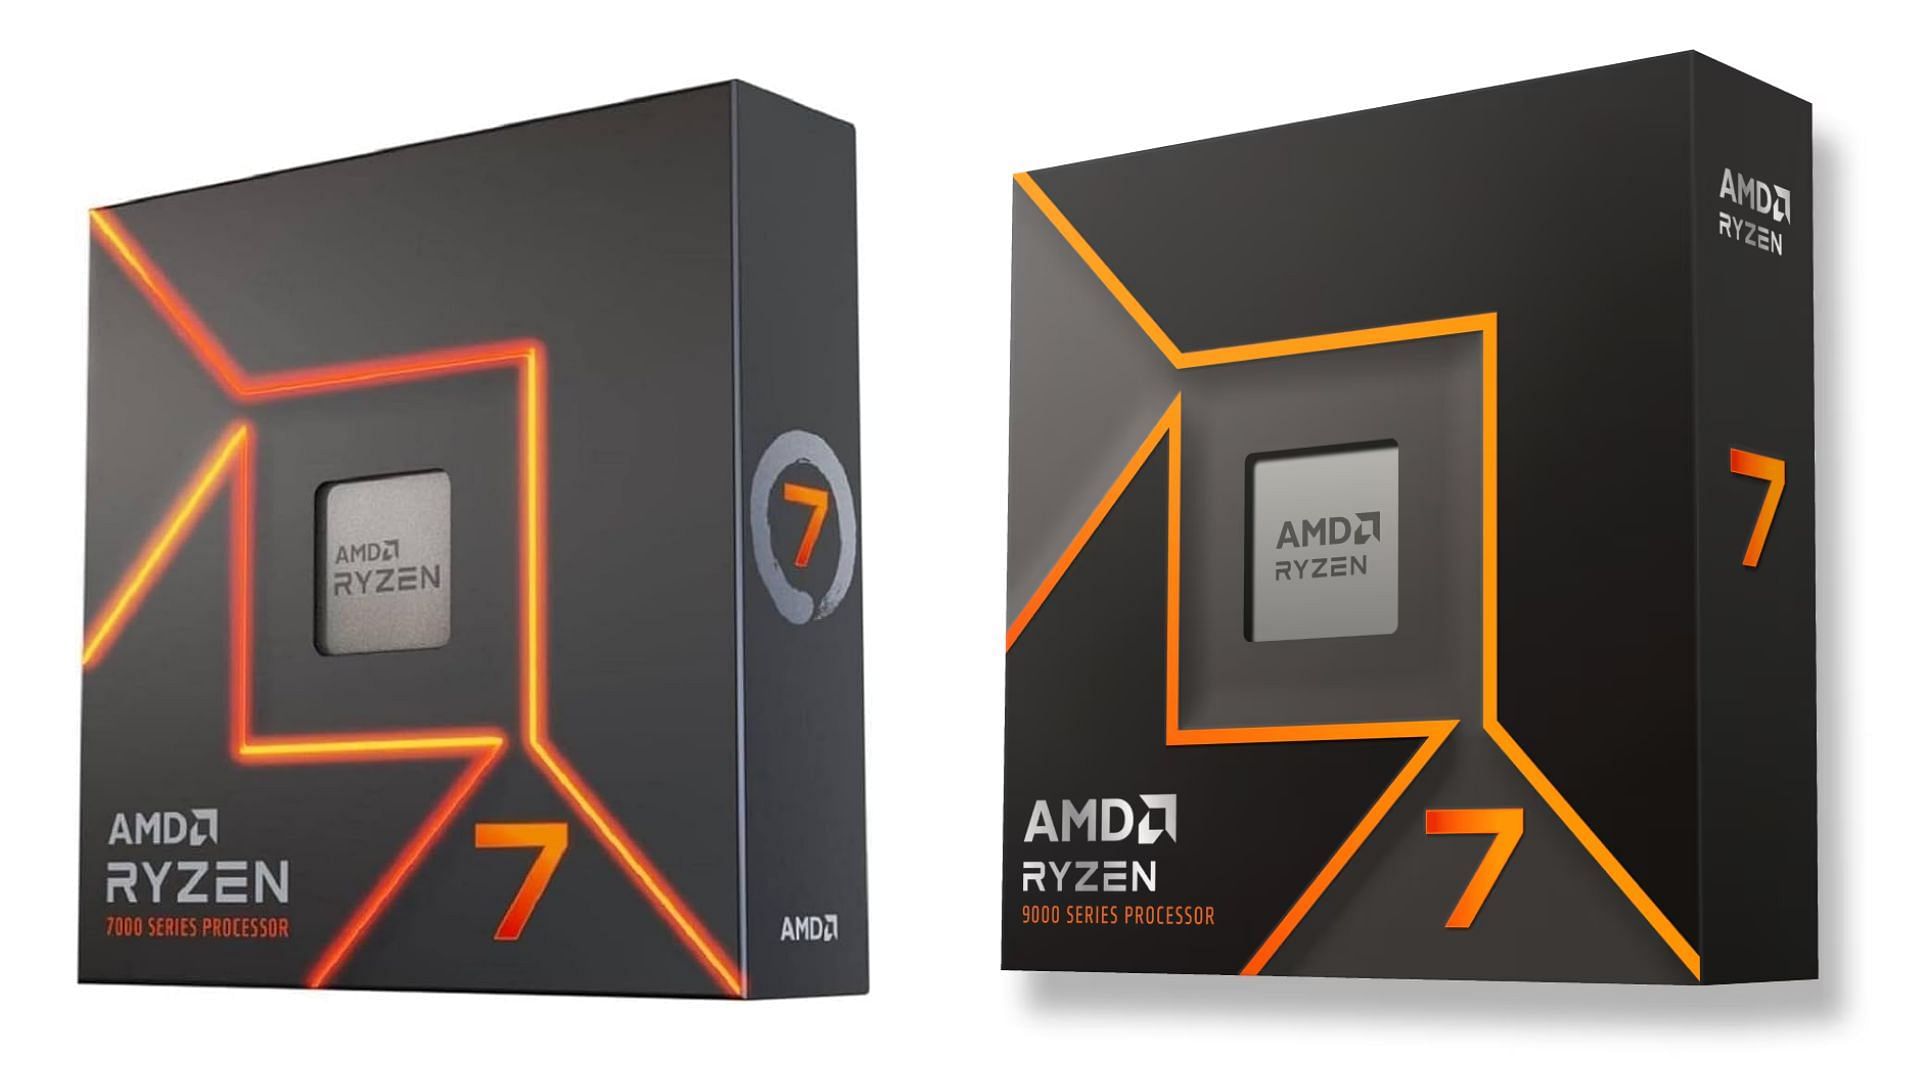 The AMD Ryzen 7 9700X and Ryzen 7 7700X are some of the best octa-core CPUs (Image via AMD and Amazon)